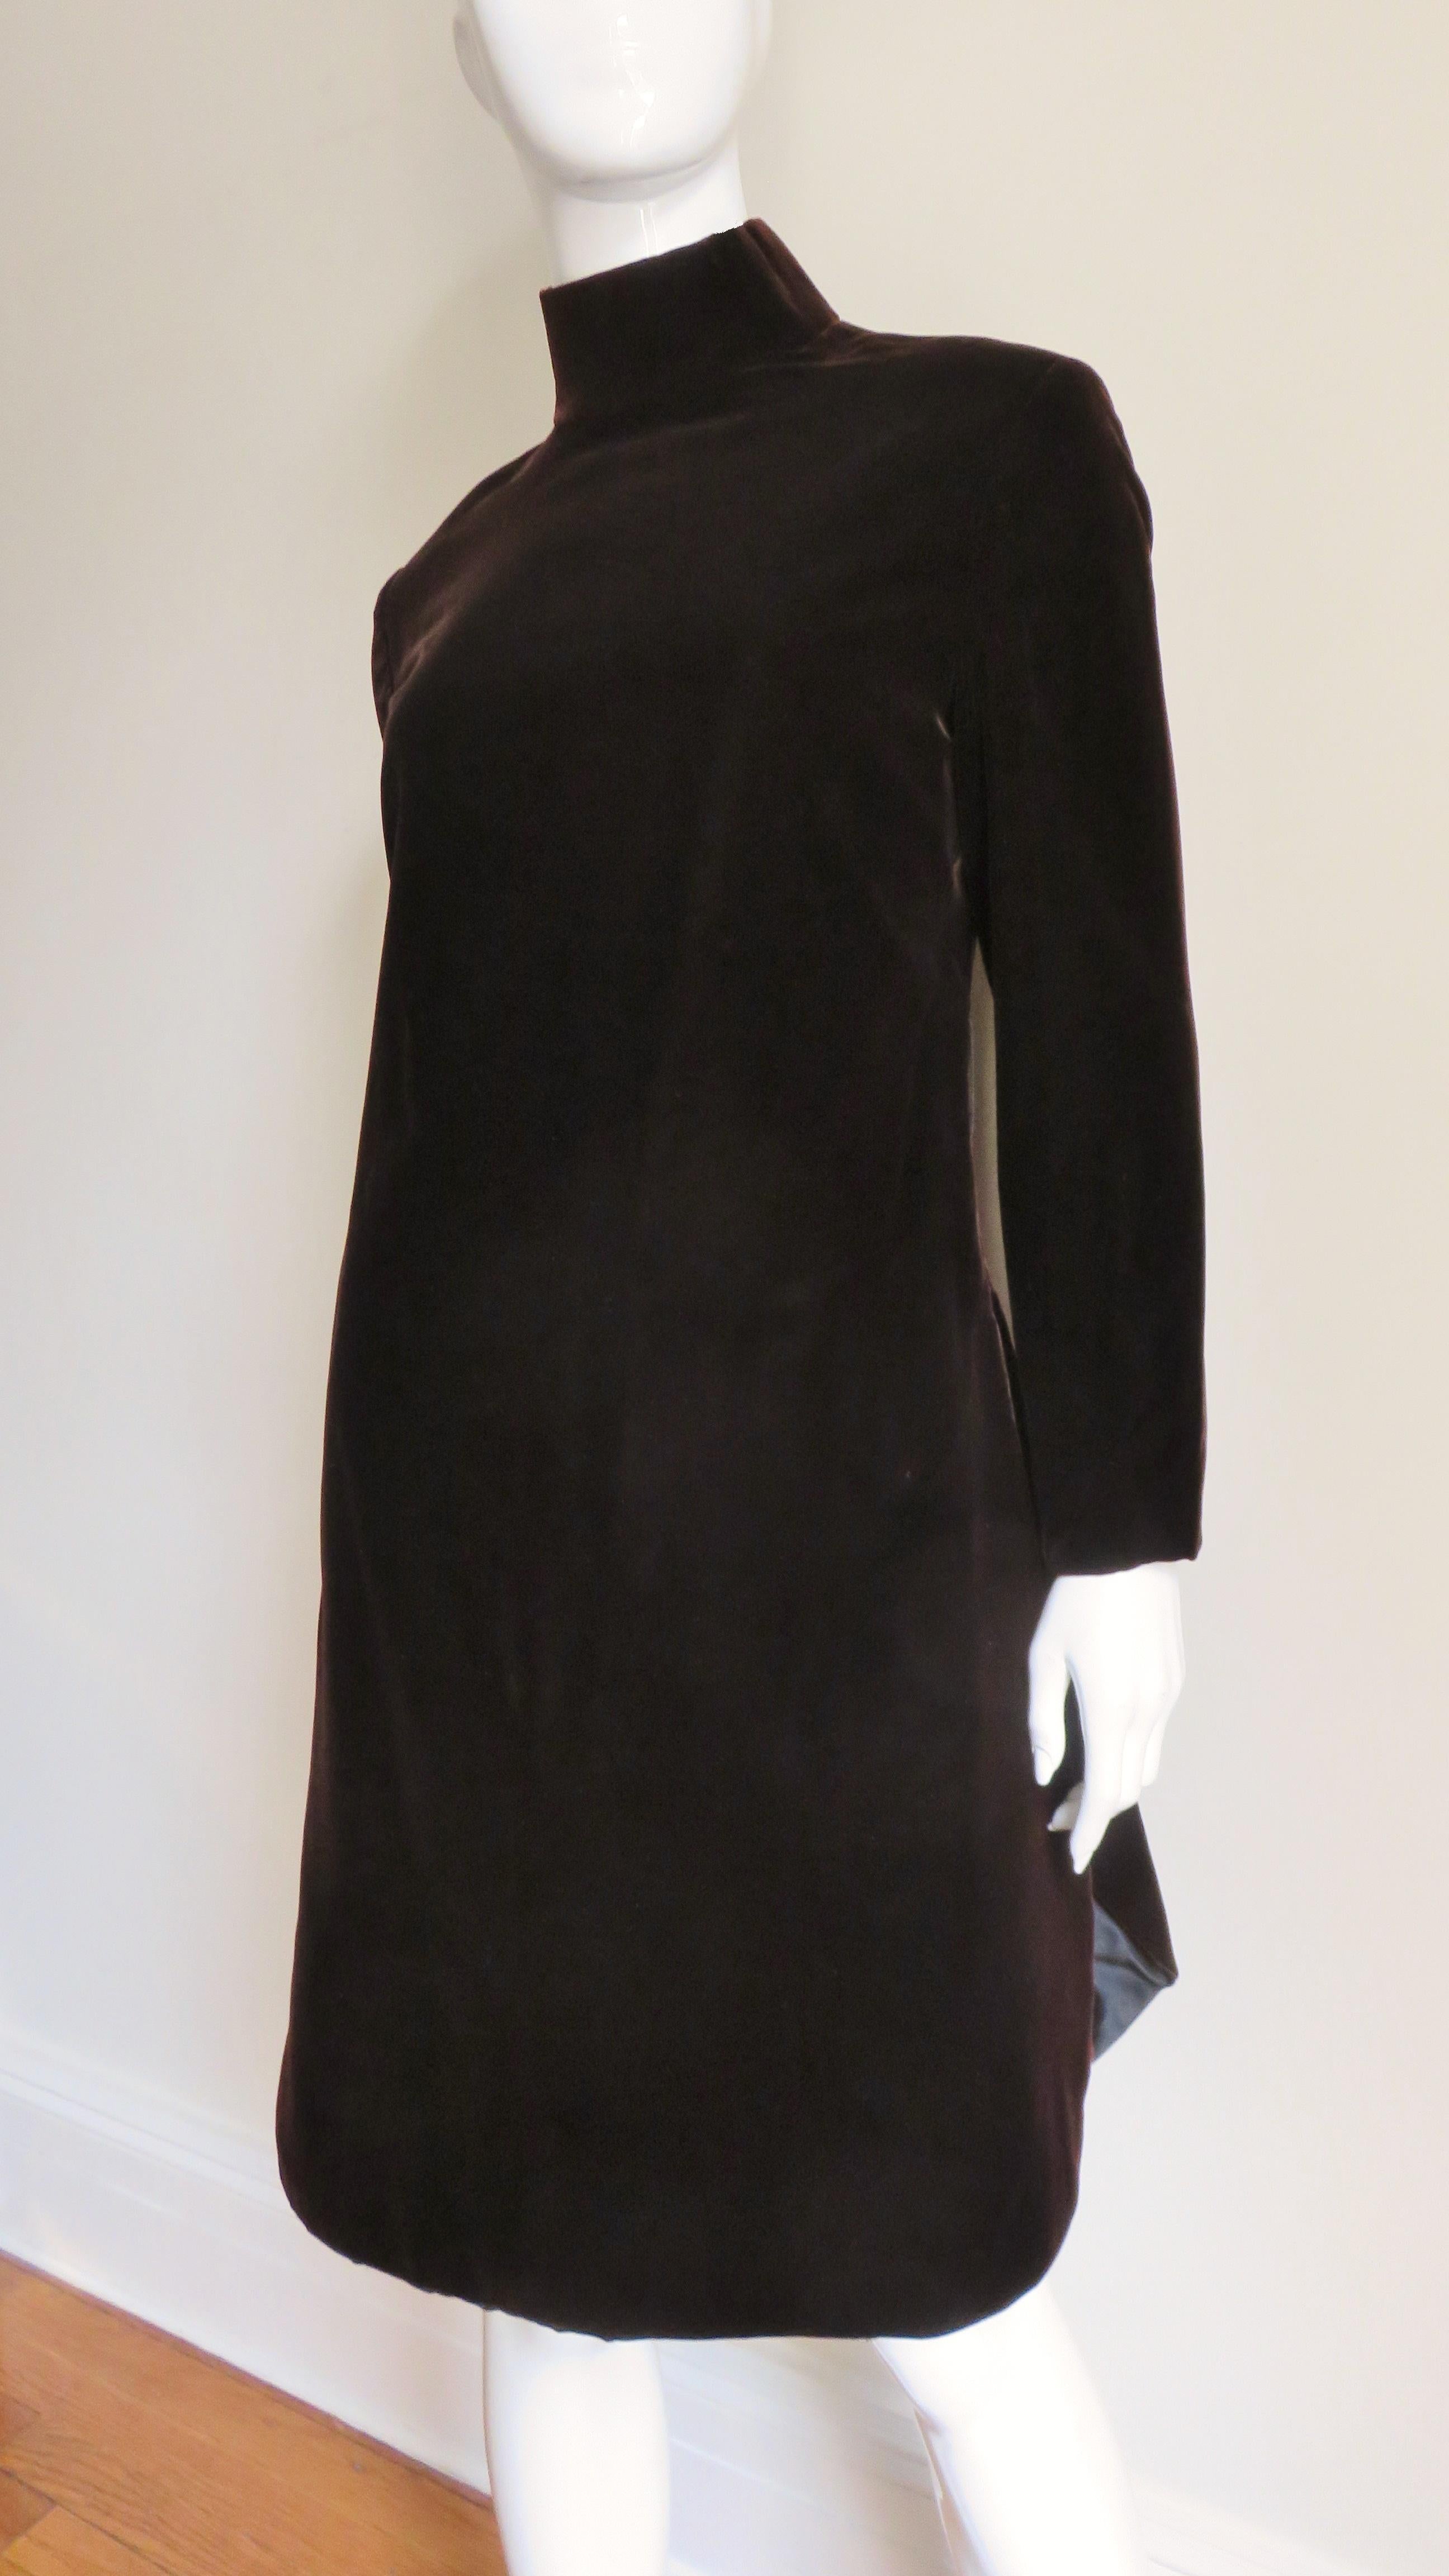 A rich brown silk velvet dress from Pierre Cardin.  It has a stand up collar, long sleeves and a shirt tail hemline which reveals a straight black silk under skirt at the sides.  It comes with a wired gold lurex tie belt, is fully lined in black